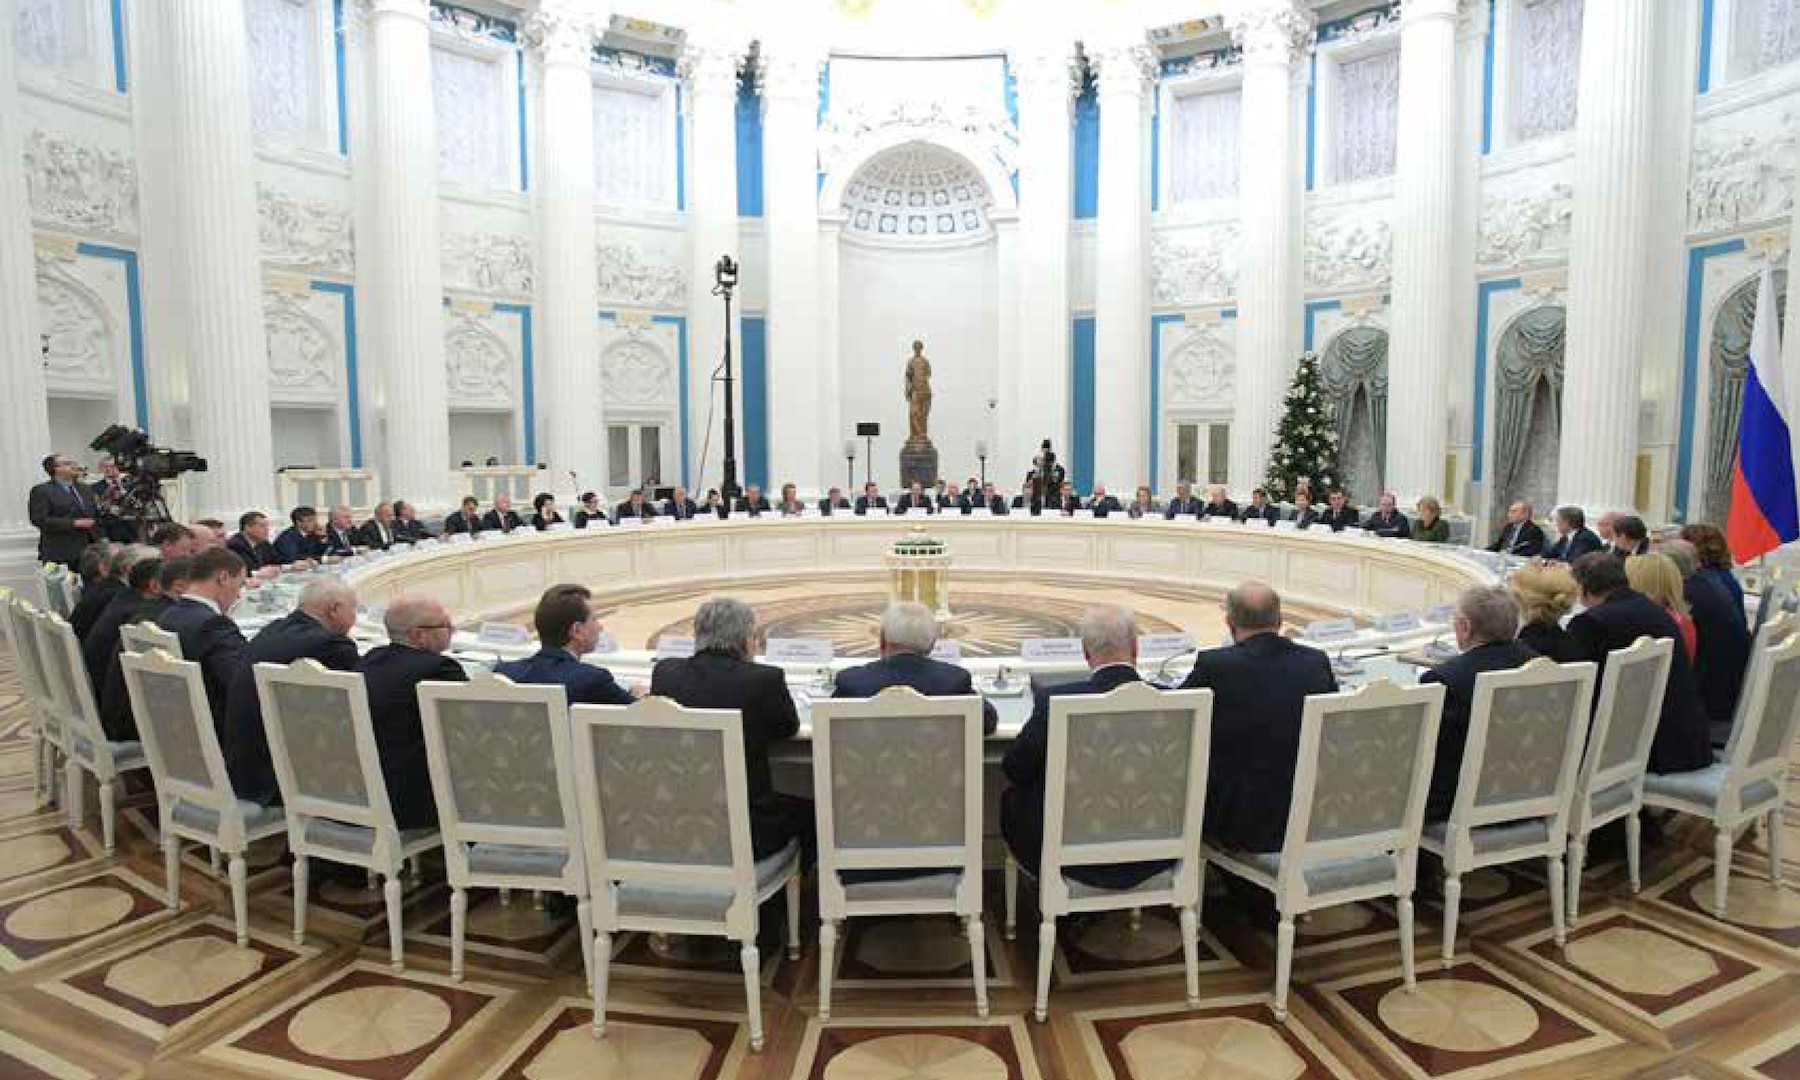 Vladimir Putin meets in the Kremlin with the leaders of the
Federation Council, the State Duma, and dedicated committees of both chambers, December 25, 2018. (President of Russia Web site/Kremlin.ru)